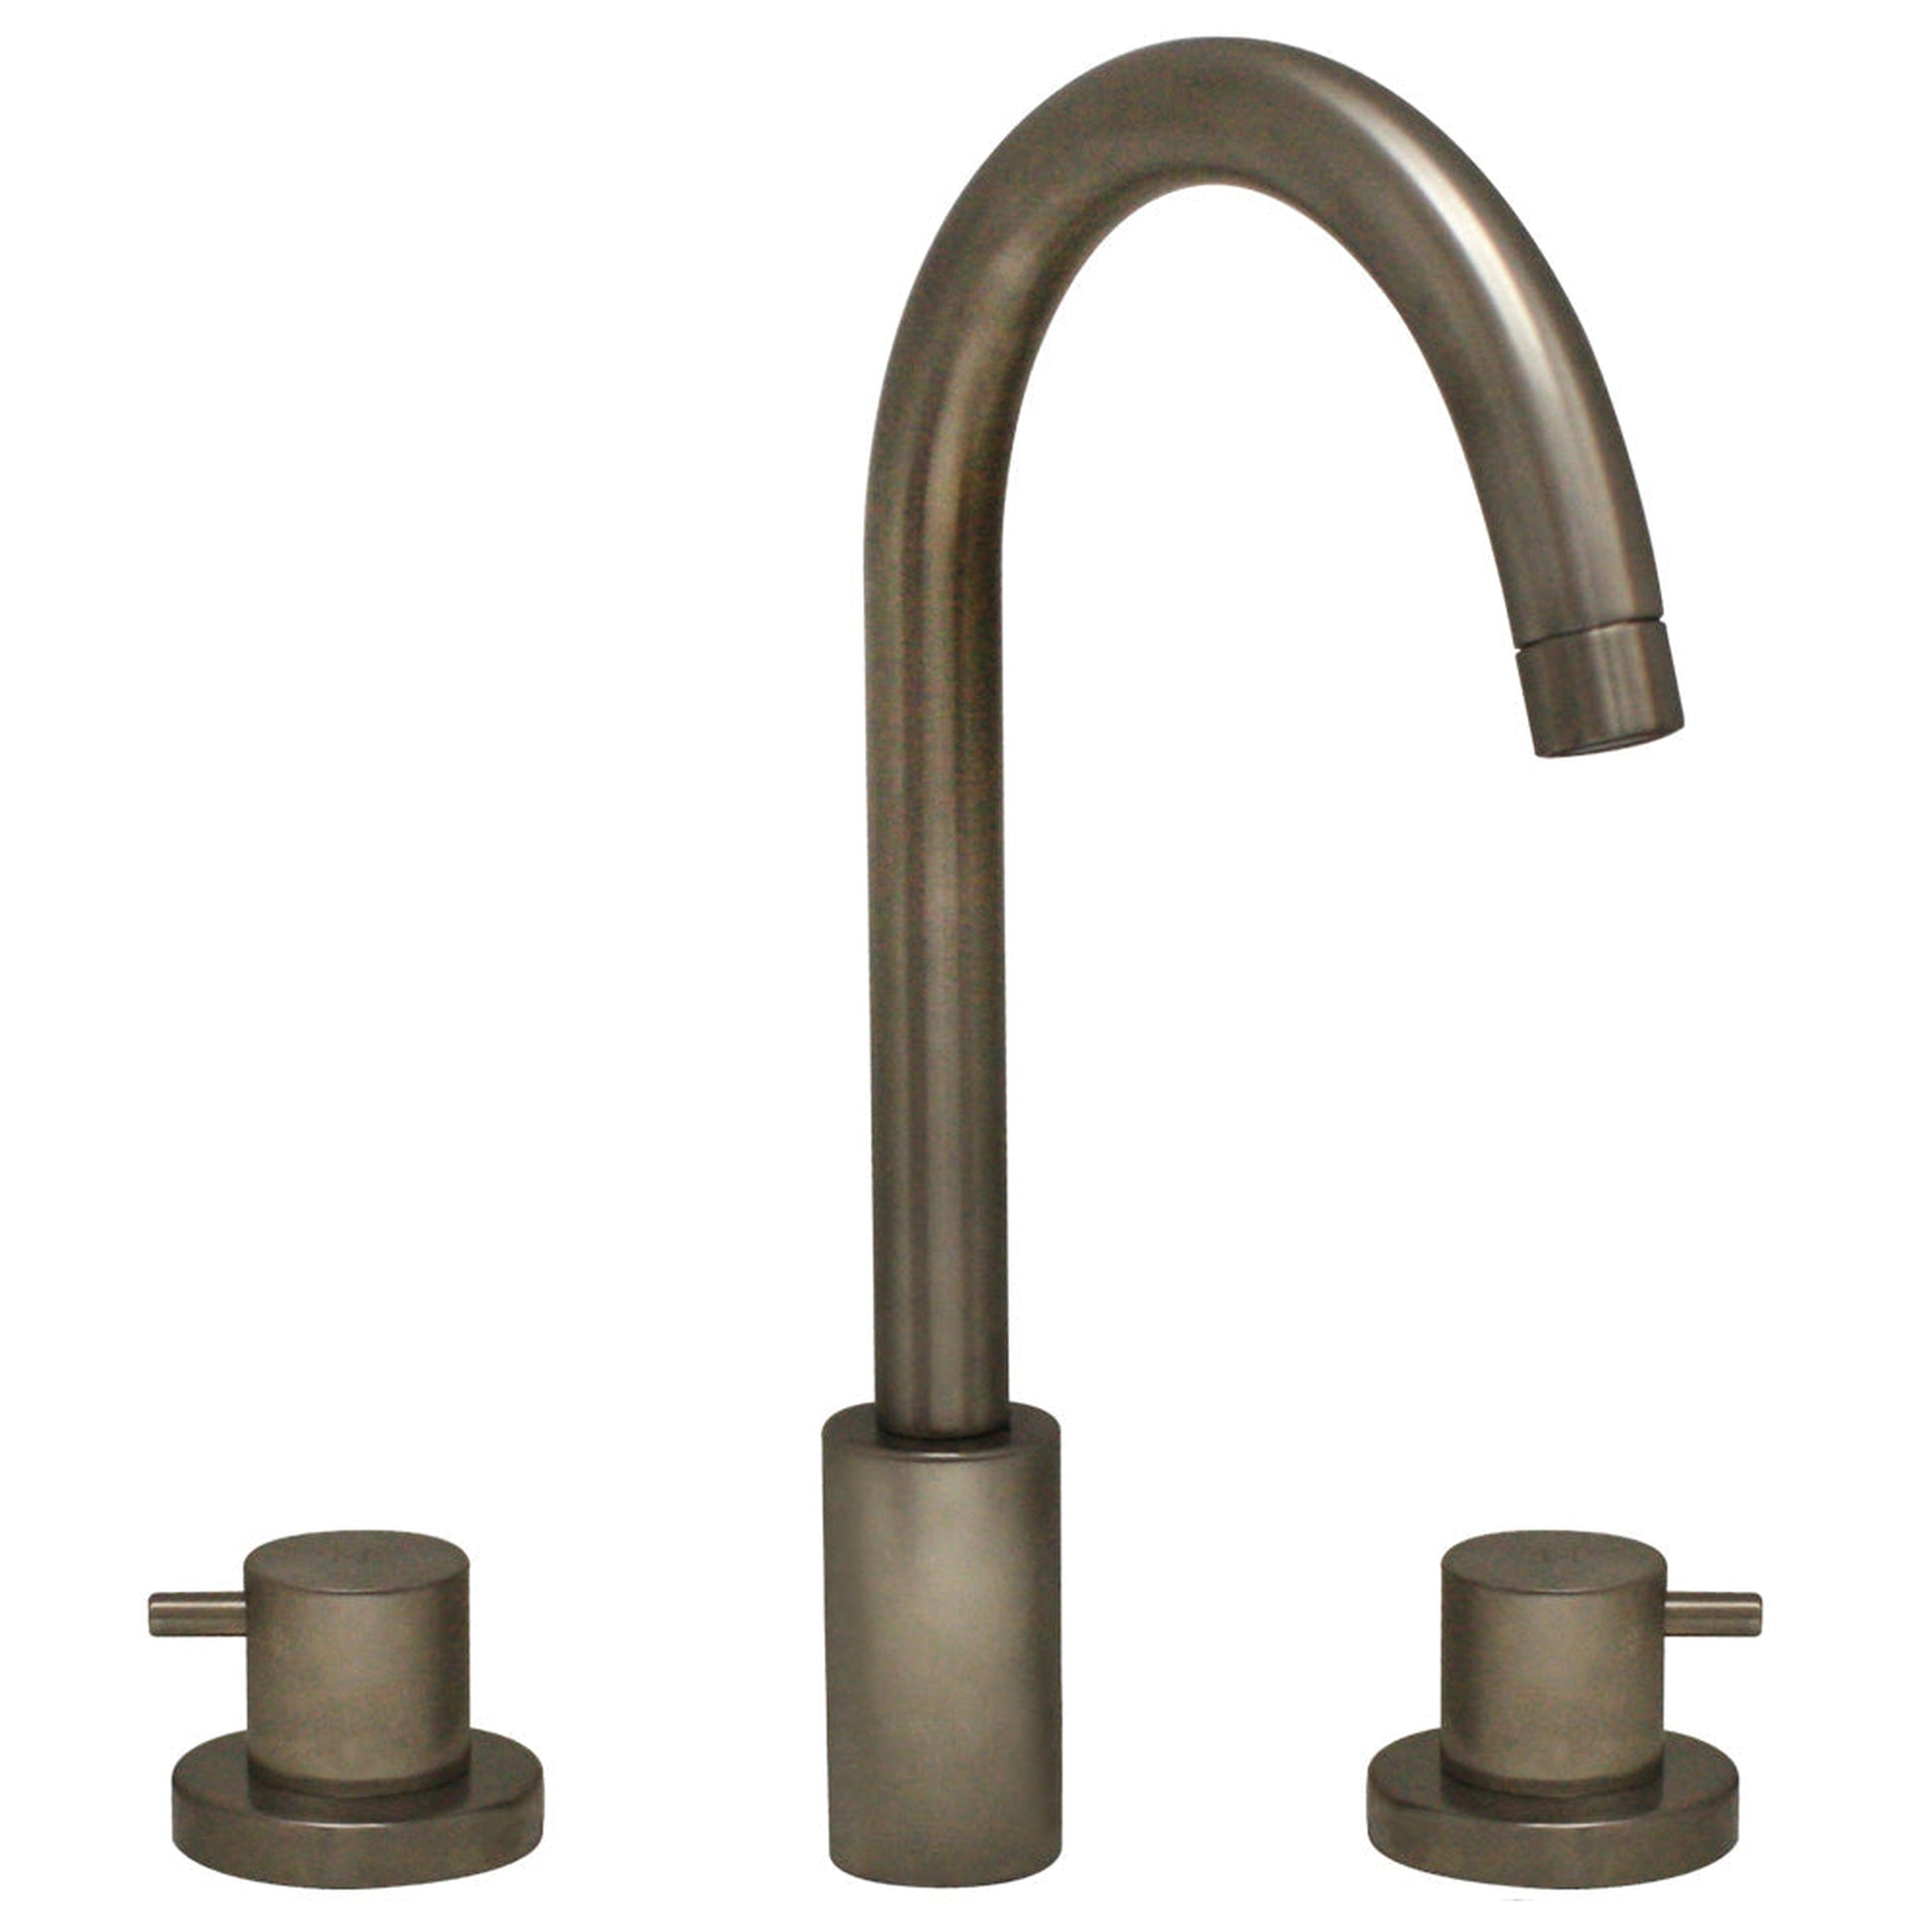 Whitehaus Luxe WHLX78214-BN Brushed Nickel Widespread Lavatory Faucet With Tall Gooseneck Swivel Spout and Pop-up Waste